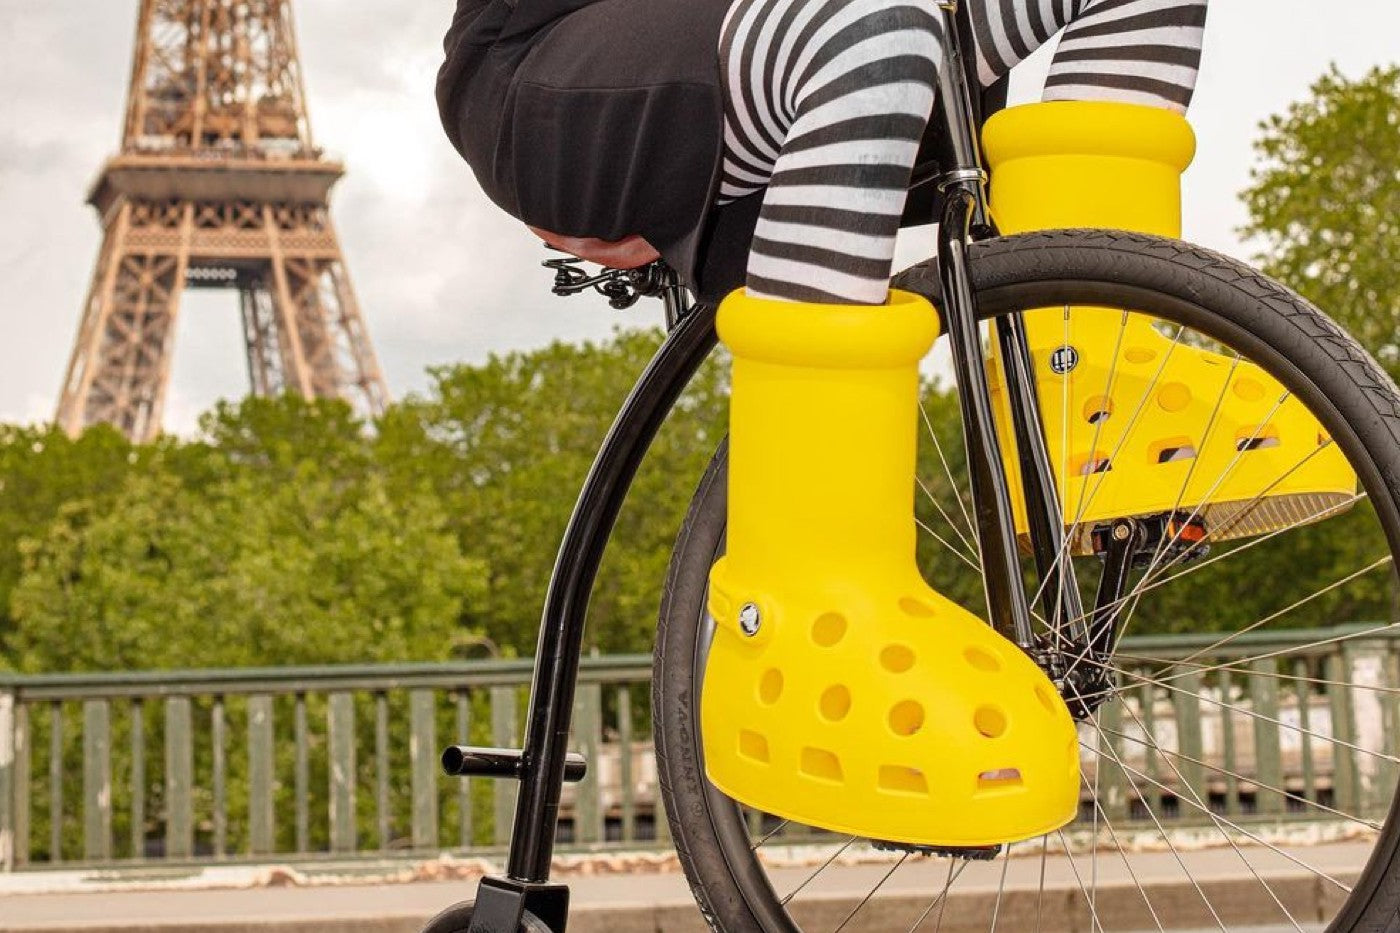 The Crocs x MSCHF Big Yellow Boot Has Got to Be the Weirdest Collab of the Year